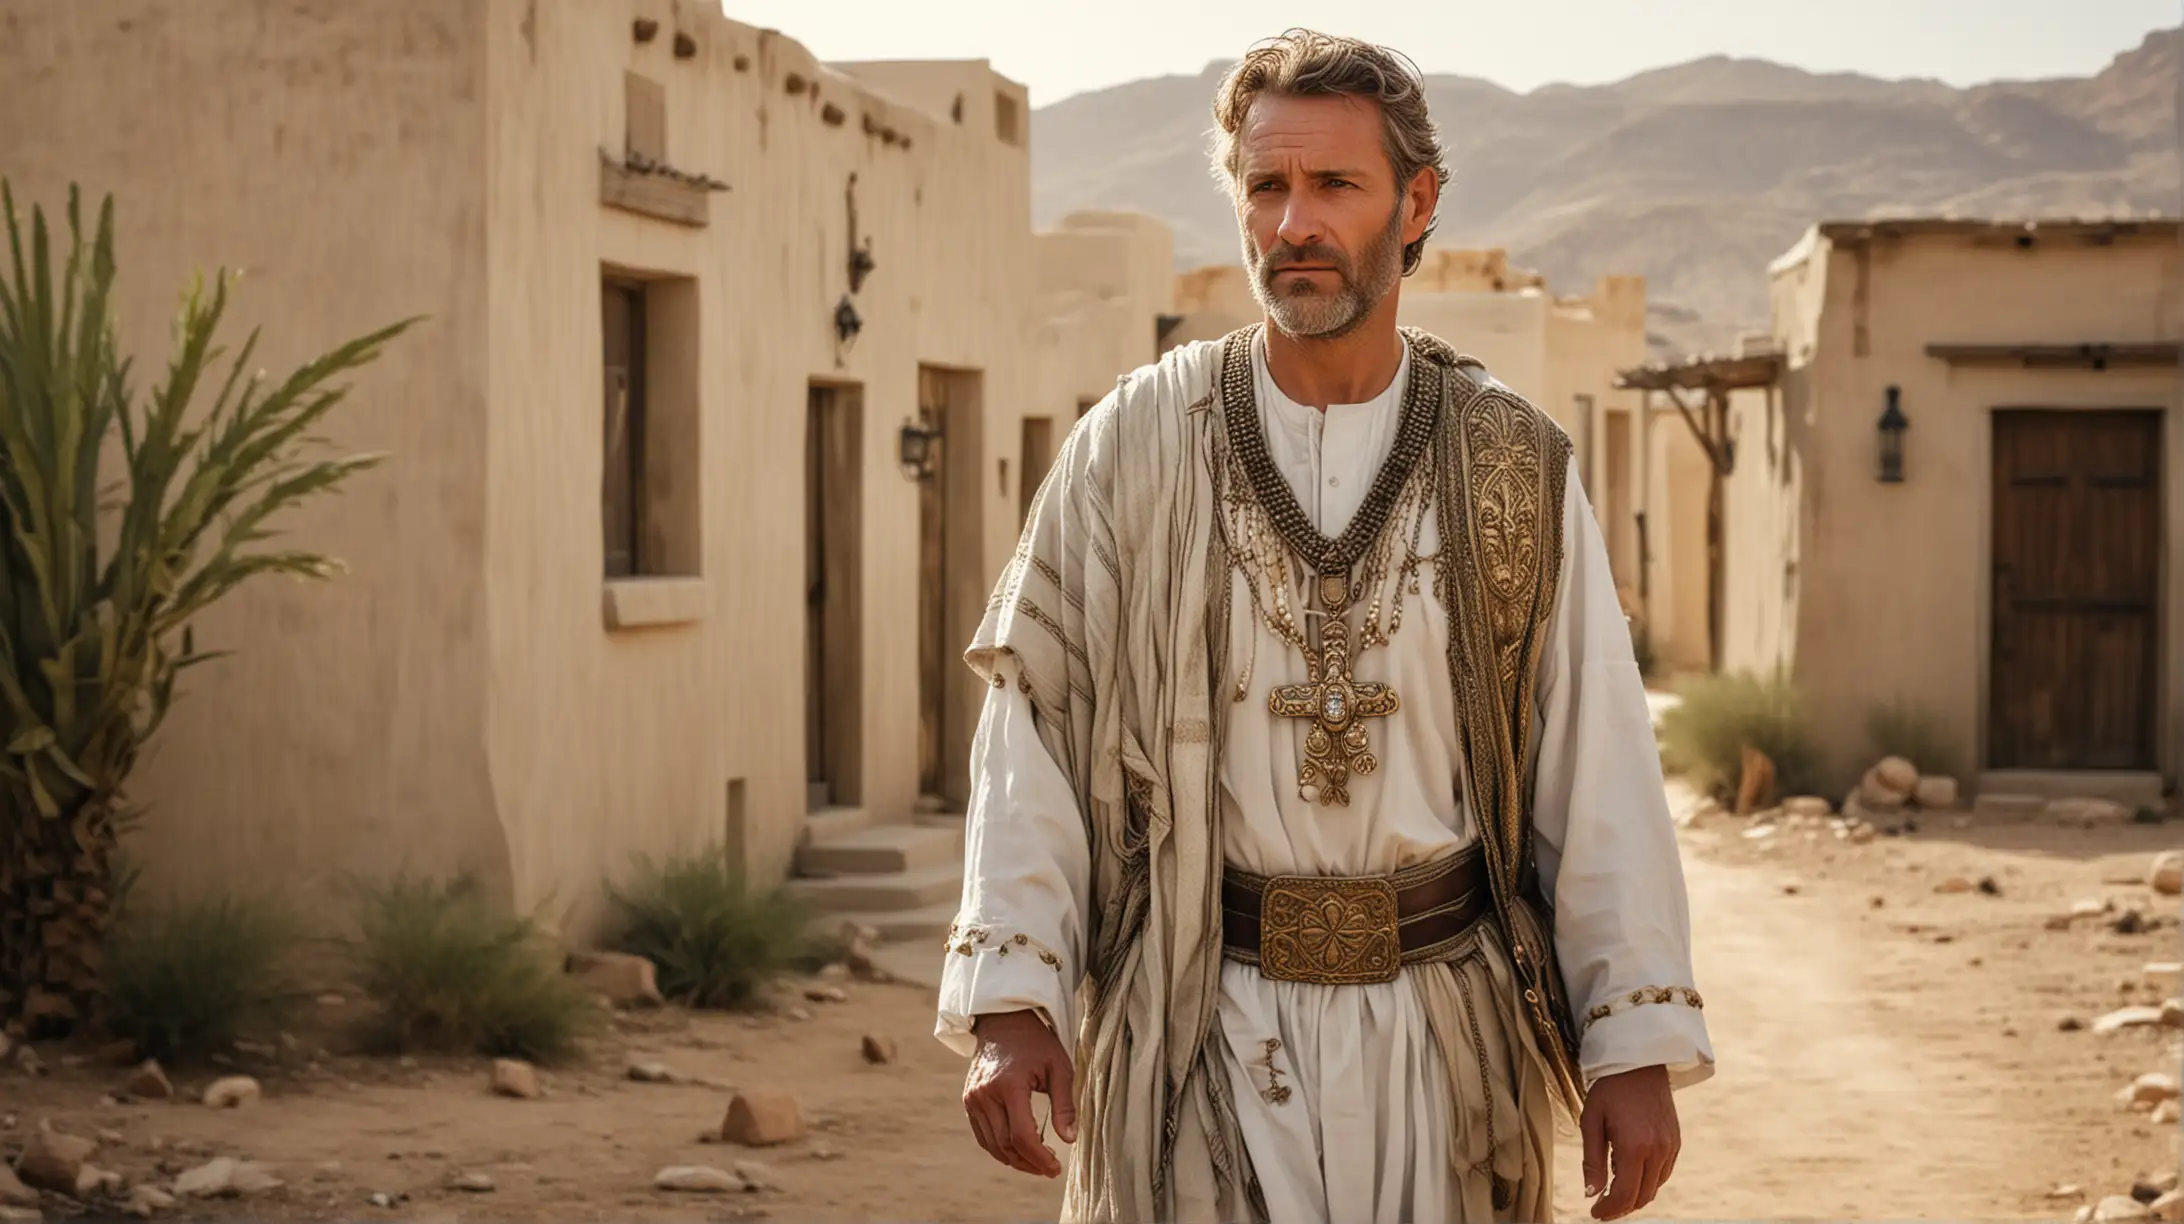 A handsome middle aged man, wearing the Holy garments for the levitical priesthood, with breastplate, and ephod. set in a small desert  village scene, Set during the Era of the Biblical Moses.